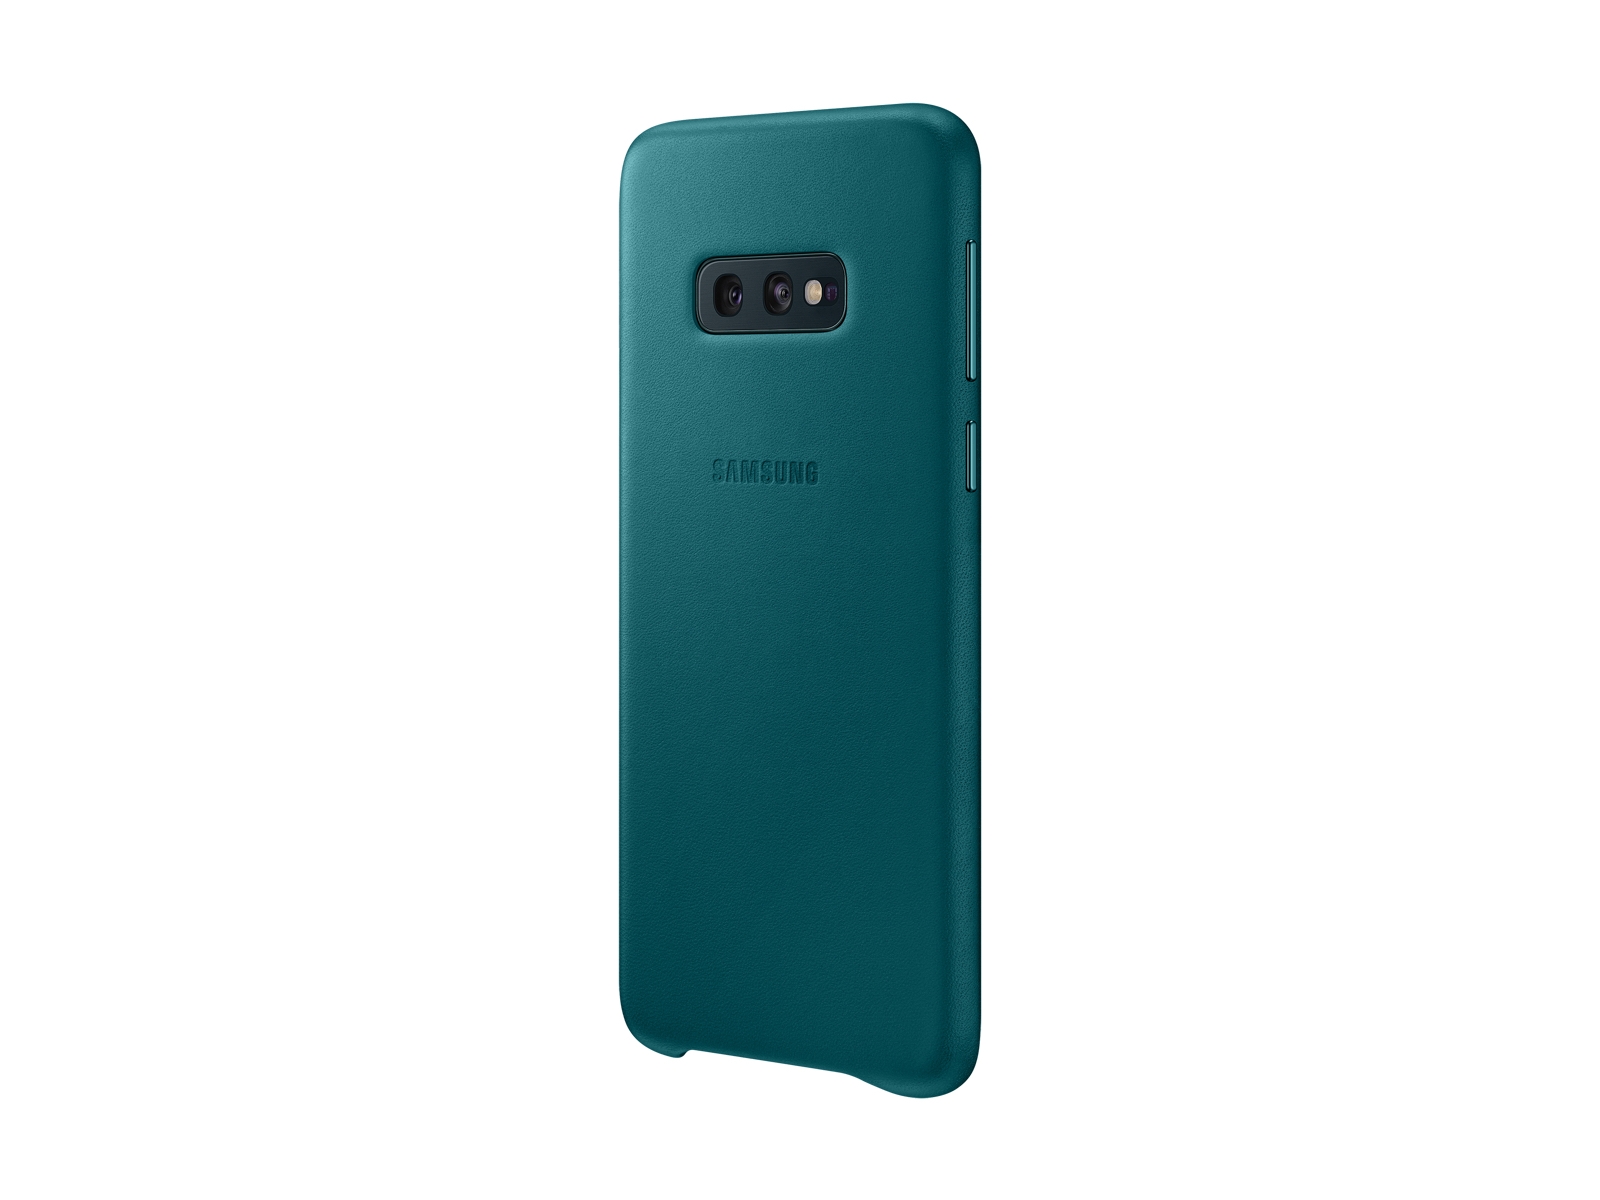 Thumbnail image of Galaxy S10e Leather Back Cover, Green